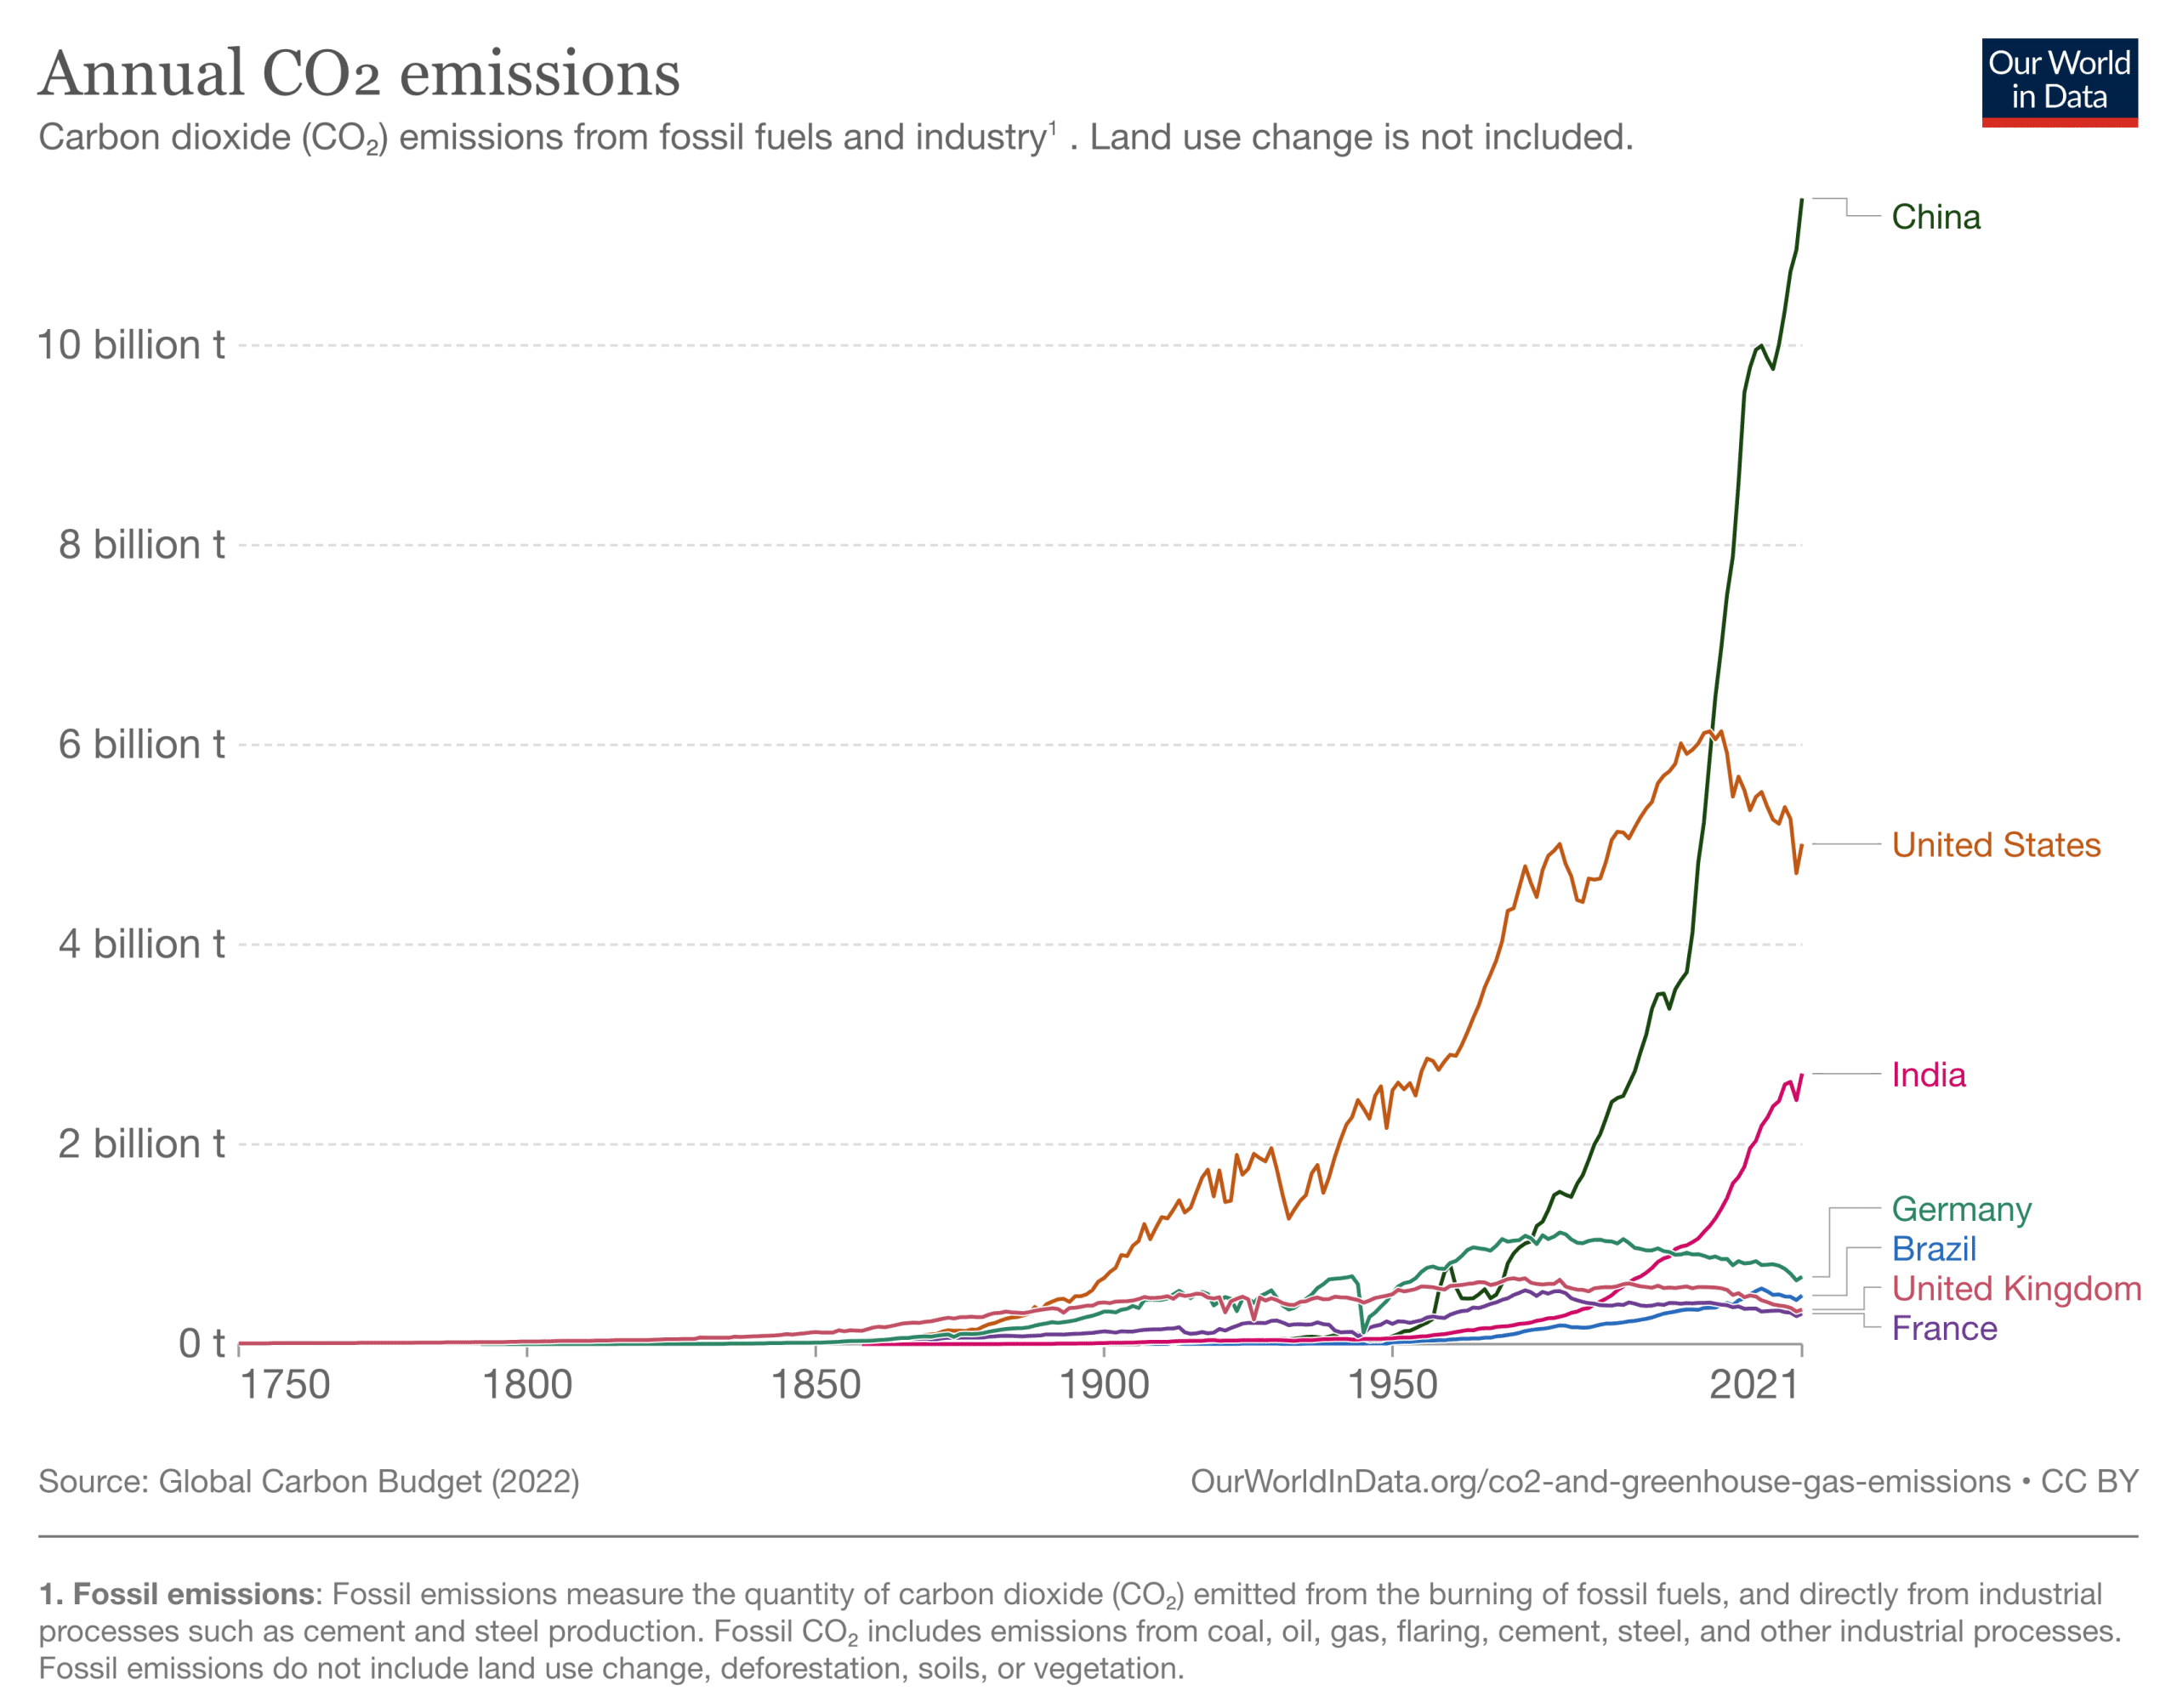 China tops the charts for annual carbon dioxide emissions. Image: Our World In Data.